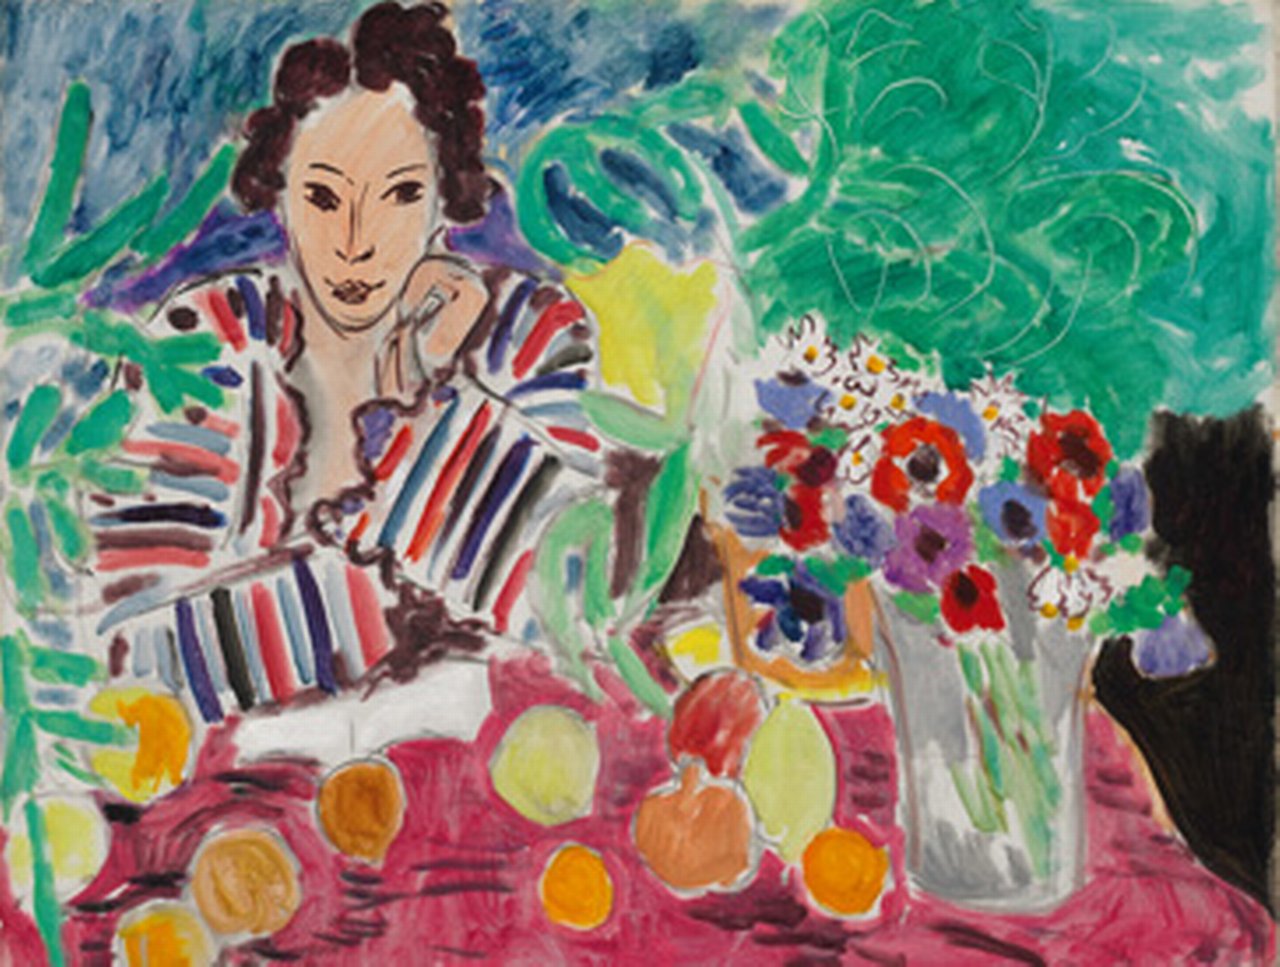 Henri Matisse, Striped Robe, Fruit, and Anemones, 1940. Oil on canvas.